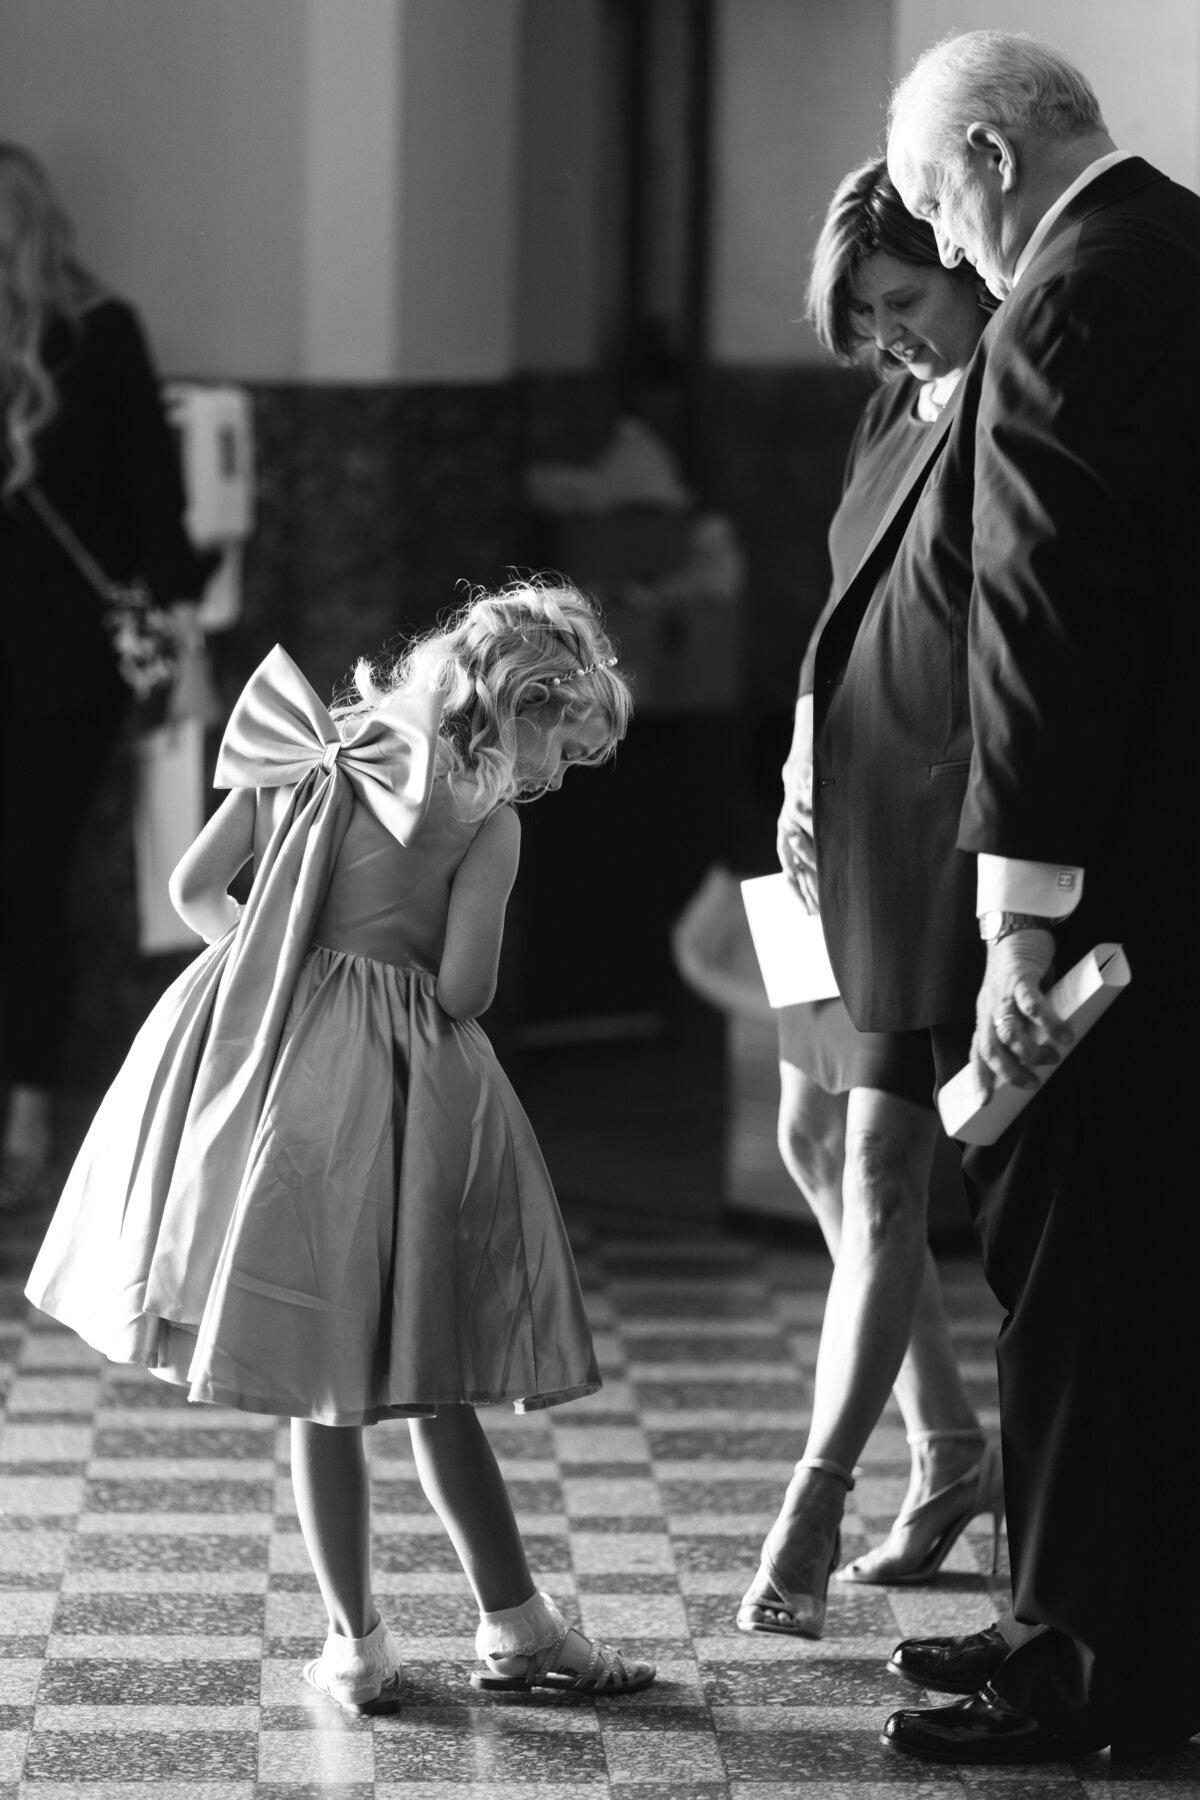 Black and white image of little girl showing off shoes to wedding guests